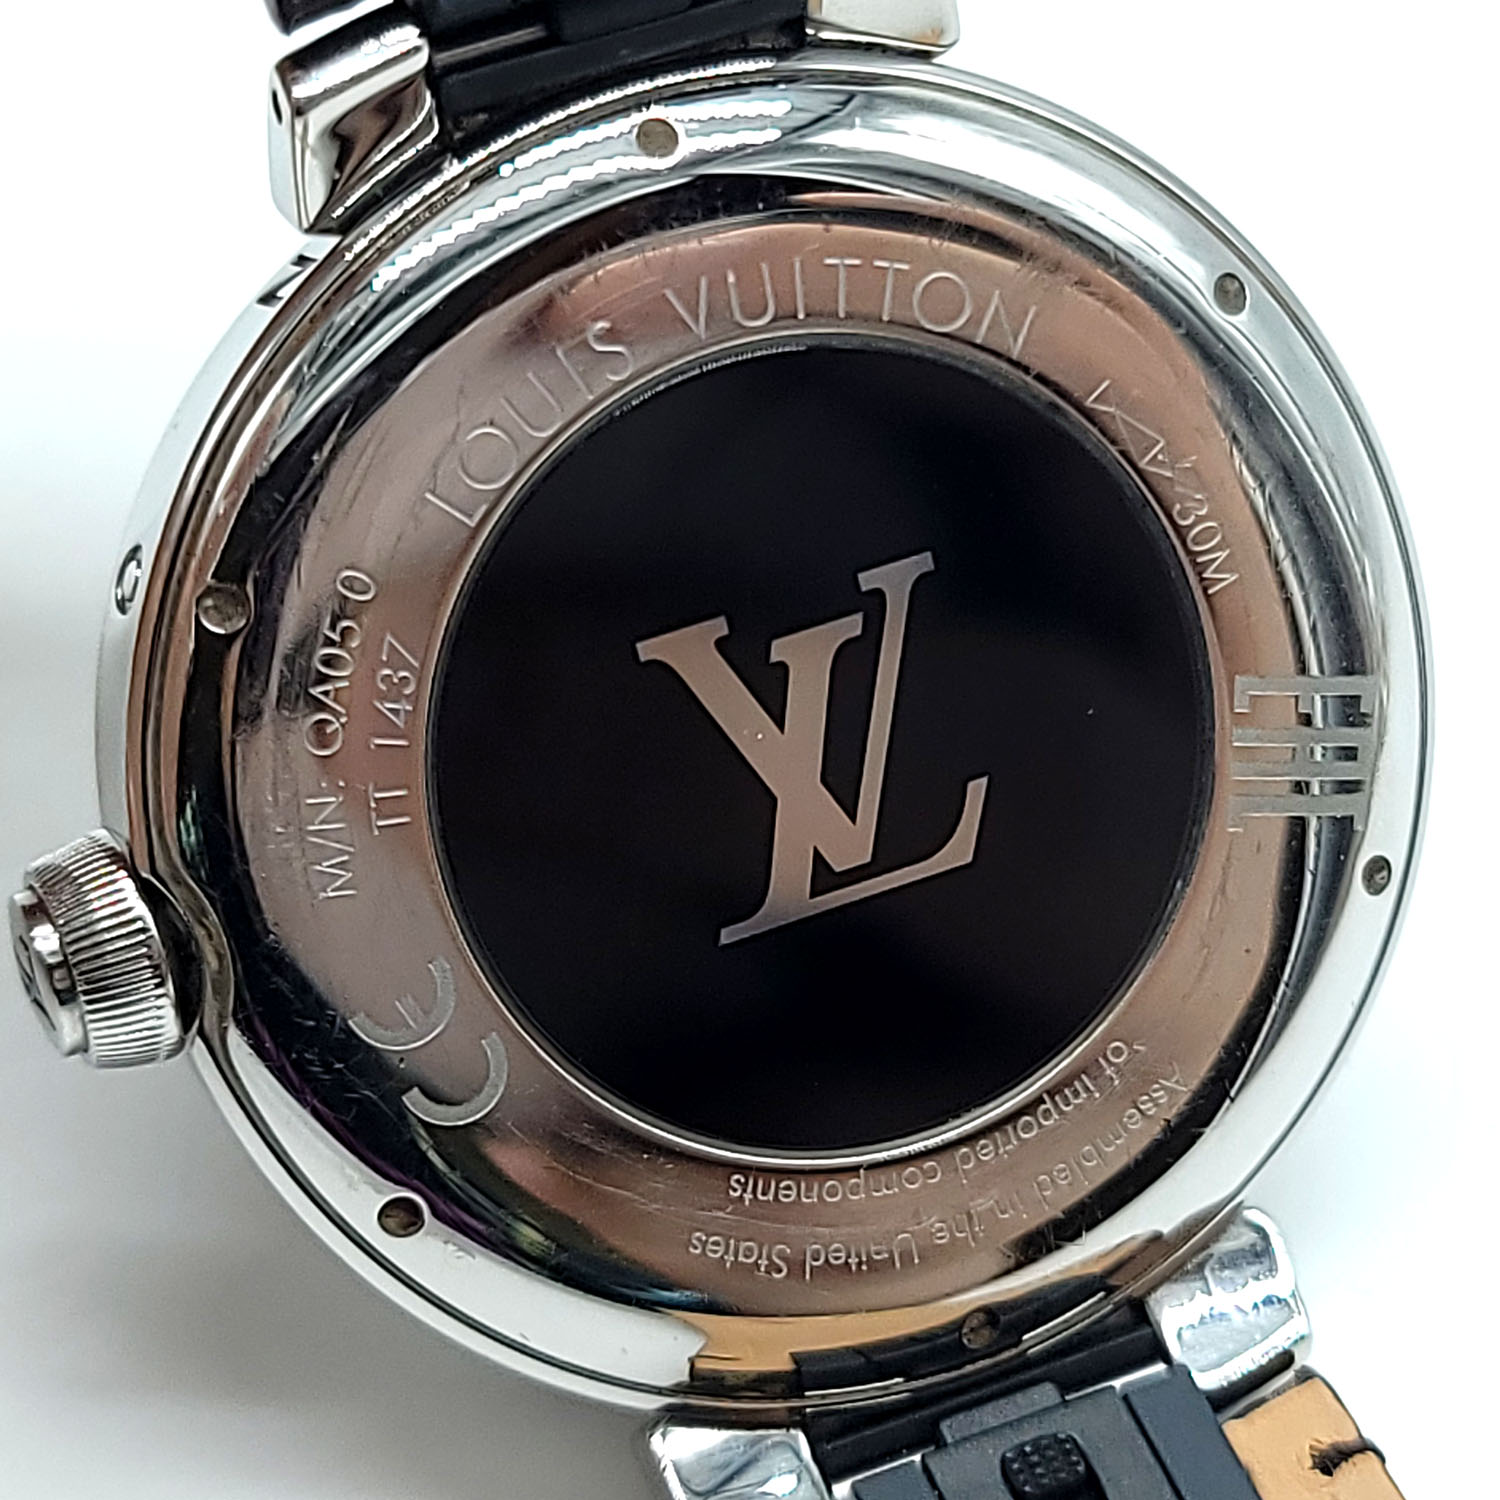 Louis Vuitton Tambour Monogram Eclipse QBB168 42mm in Stainless Steel - US